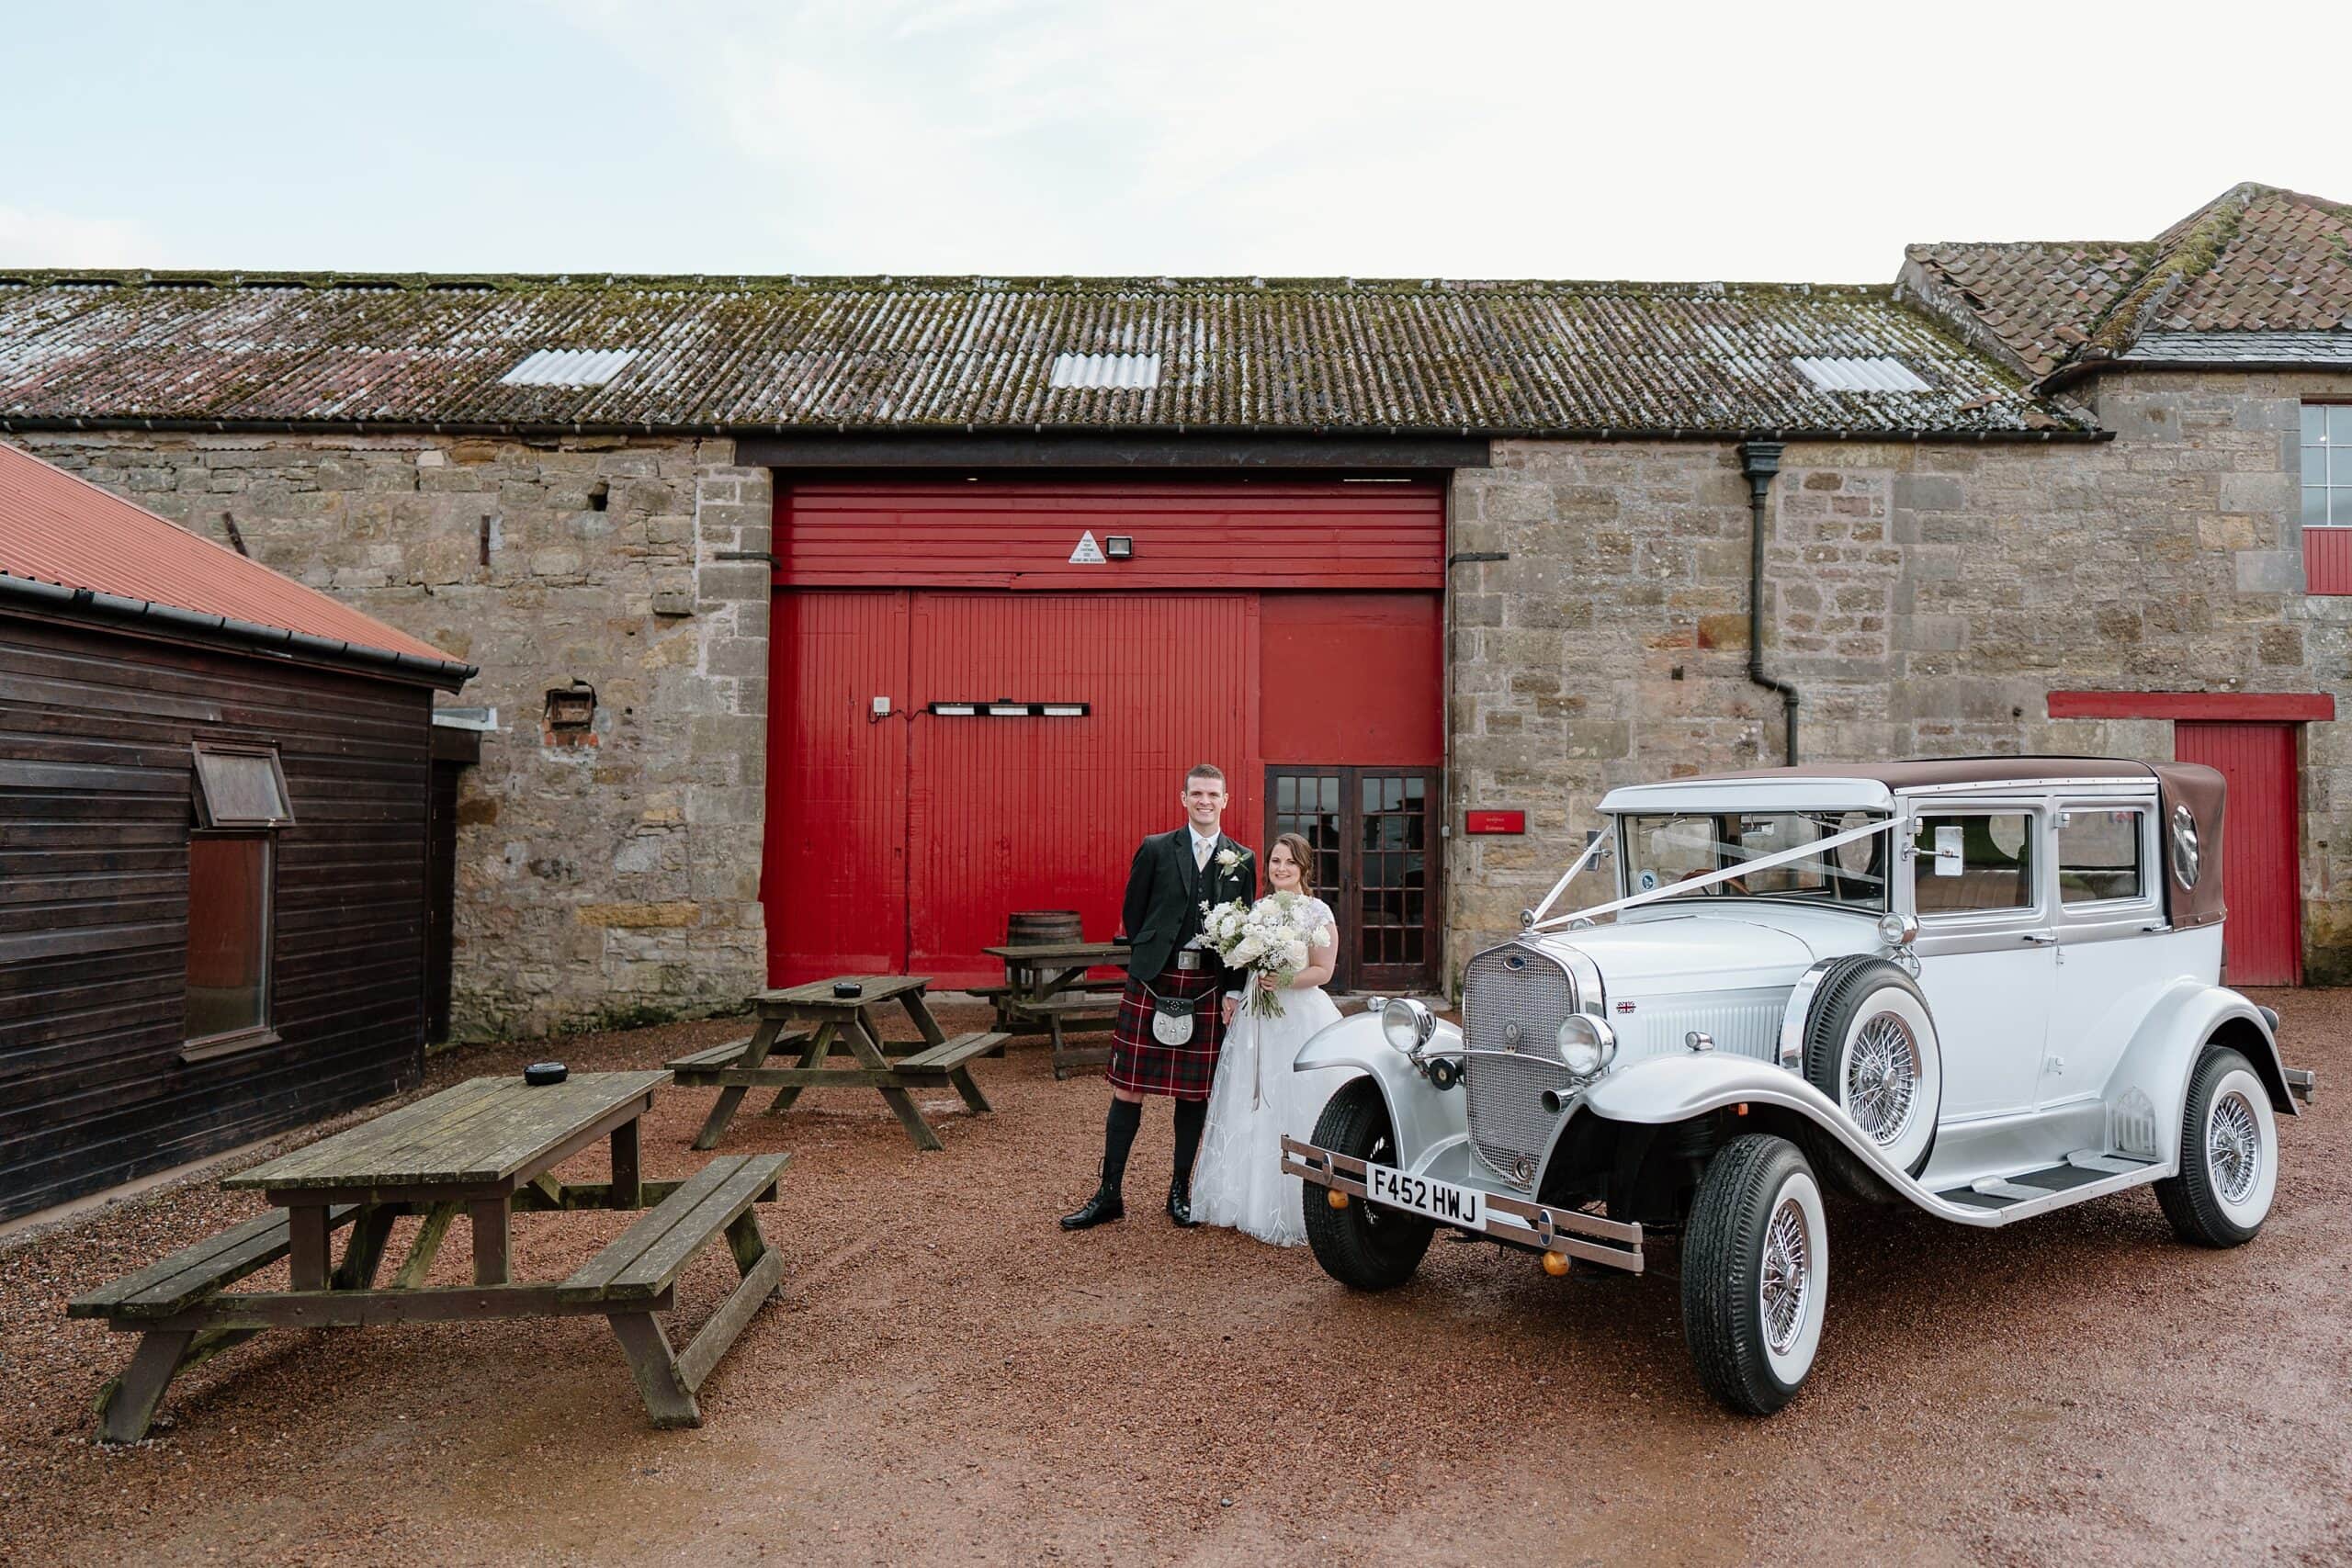 kinkell byre wedding photos exterior outside view of farm barn wedding venue st andrews scotland bride and groom with classic car